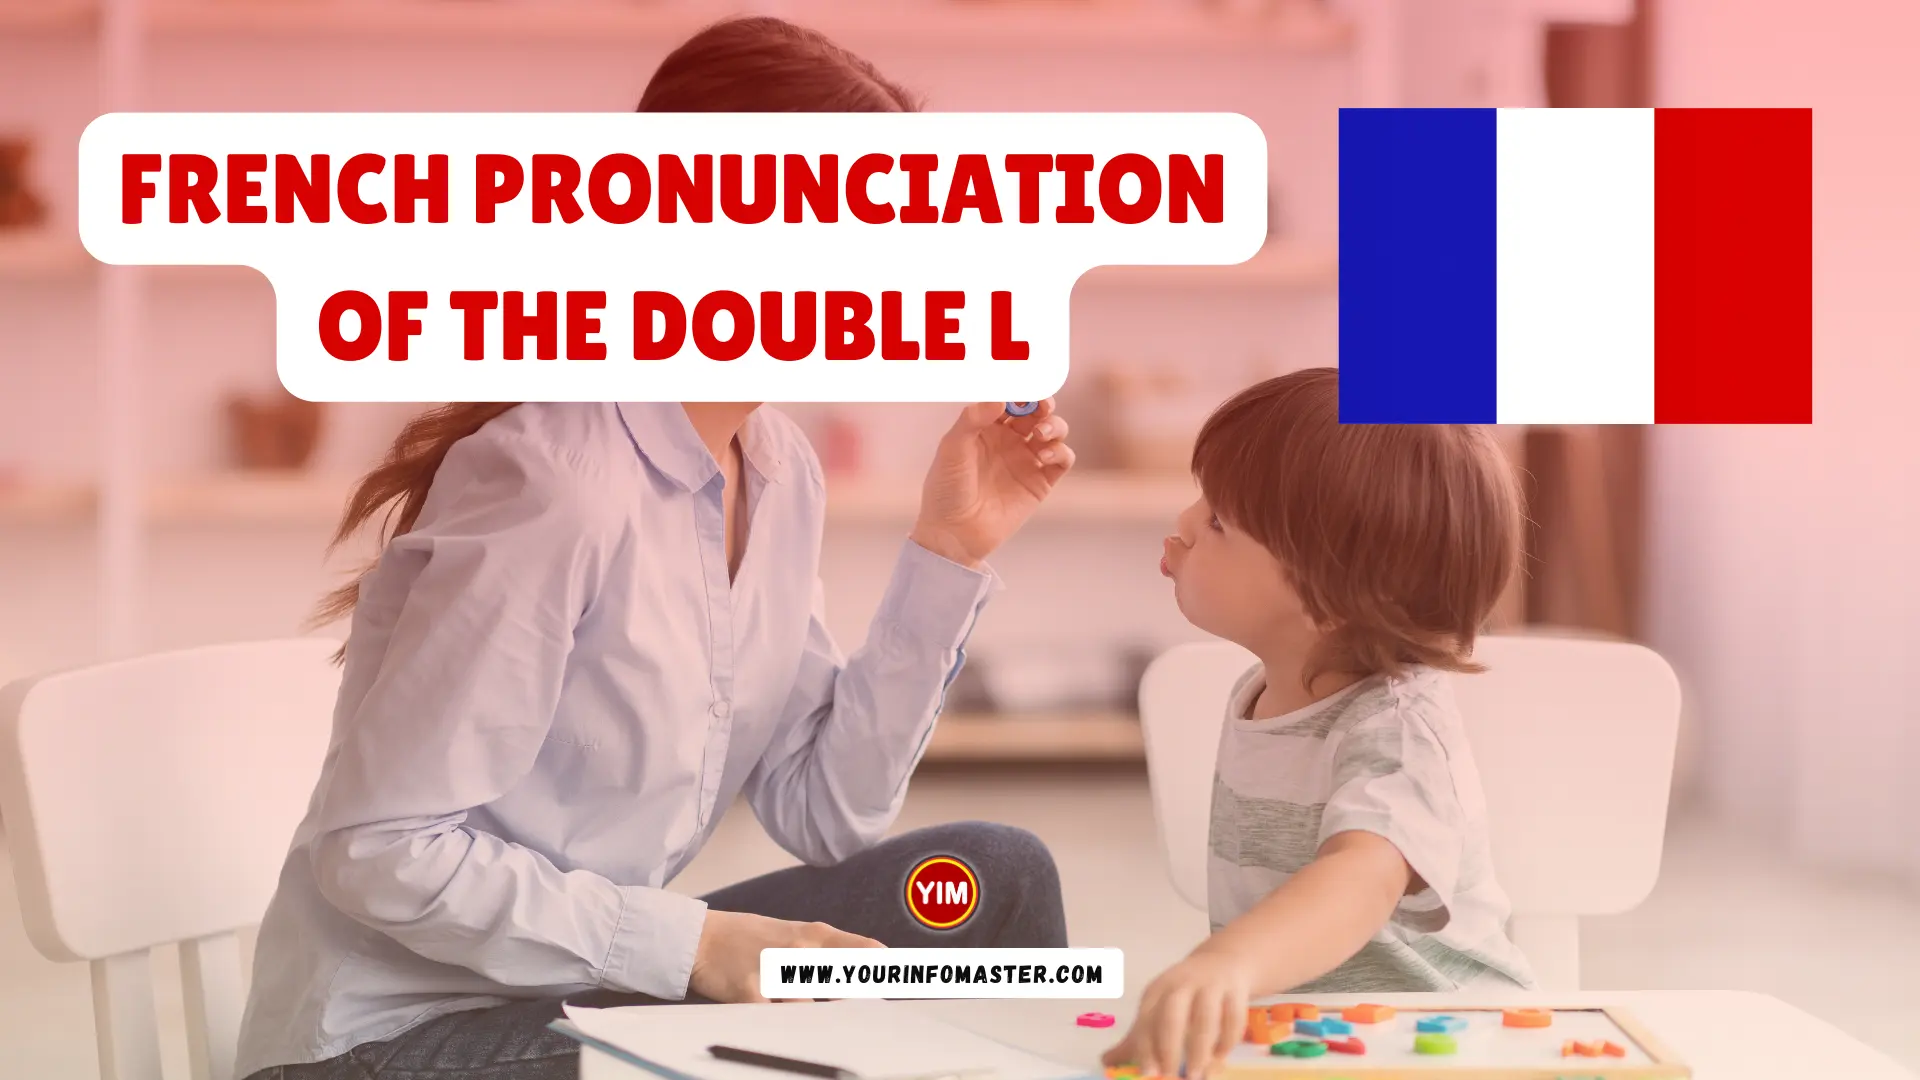 French Pronunciation of the Double L